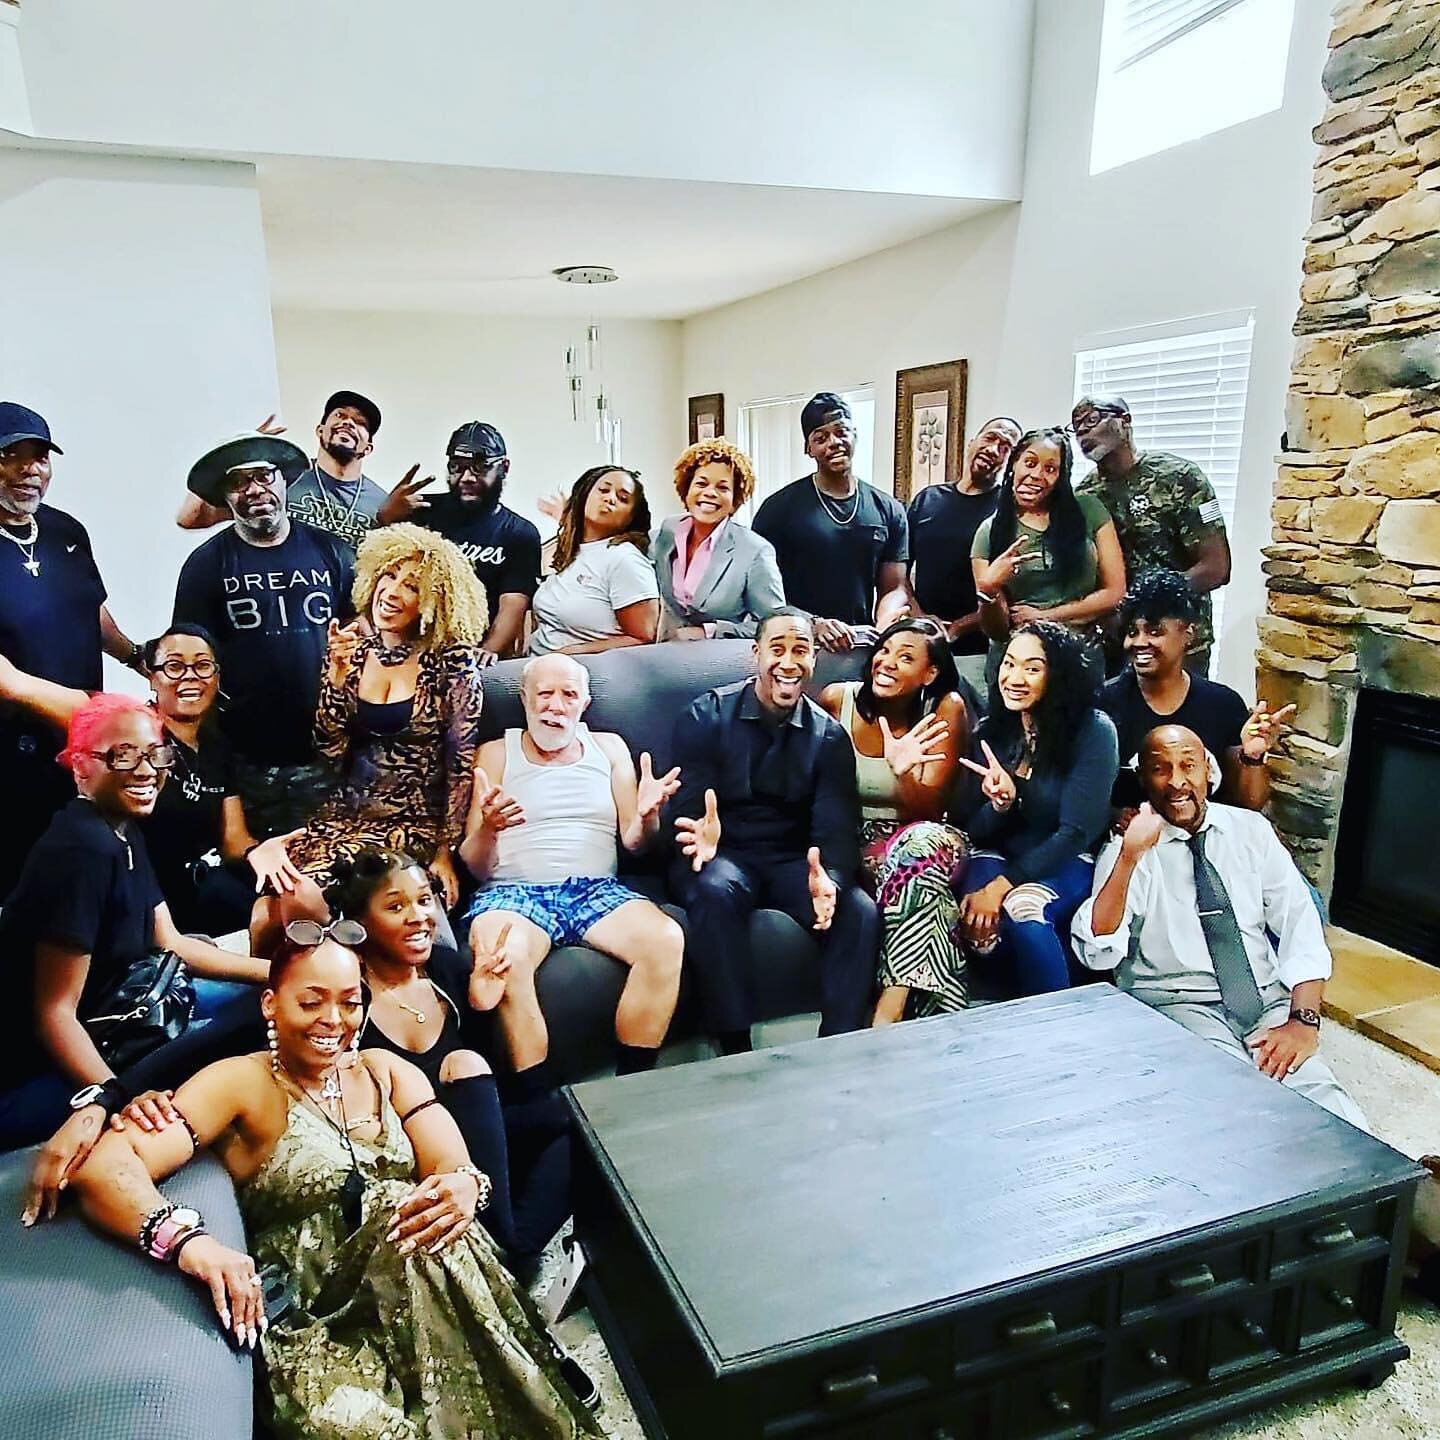 Blessed to have worked with such a wonderful crew on set of the upcoming series #Suitedeal running #boomsound for this project and I consider them apart of my extended film family 🎥🎬 Looking forward to working with them again!! S/O to @mitchcredle 